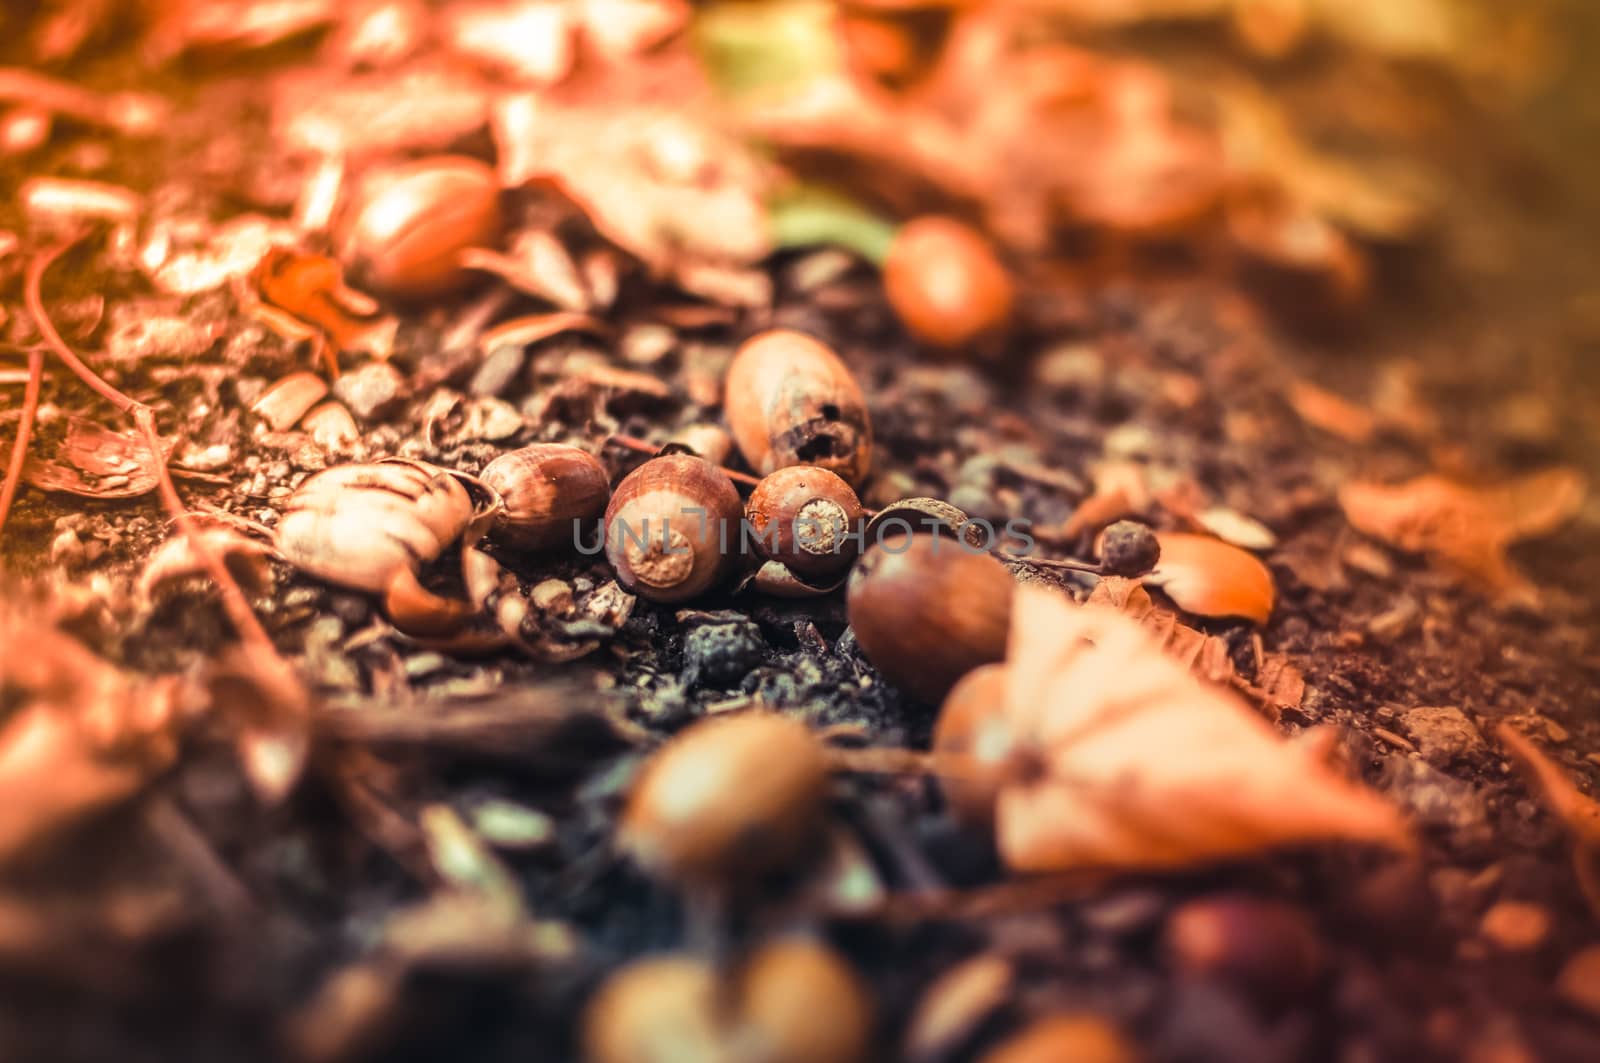 Fallen acorns with hats lie on the ground in the forest among the leaves. Textural background and natural materials with selective focus and bokeh. Copy space